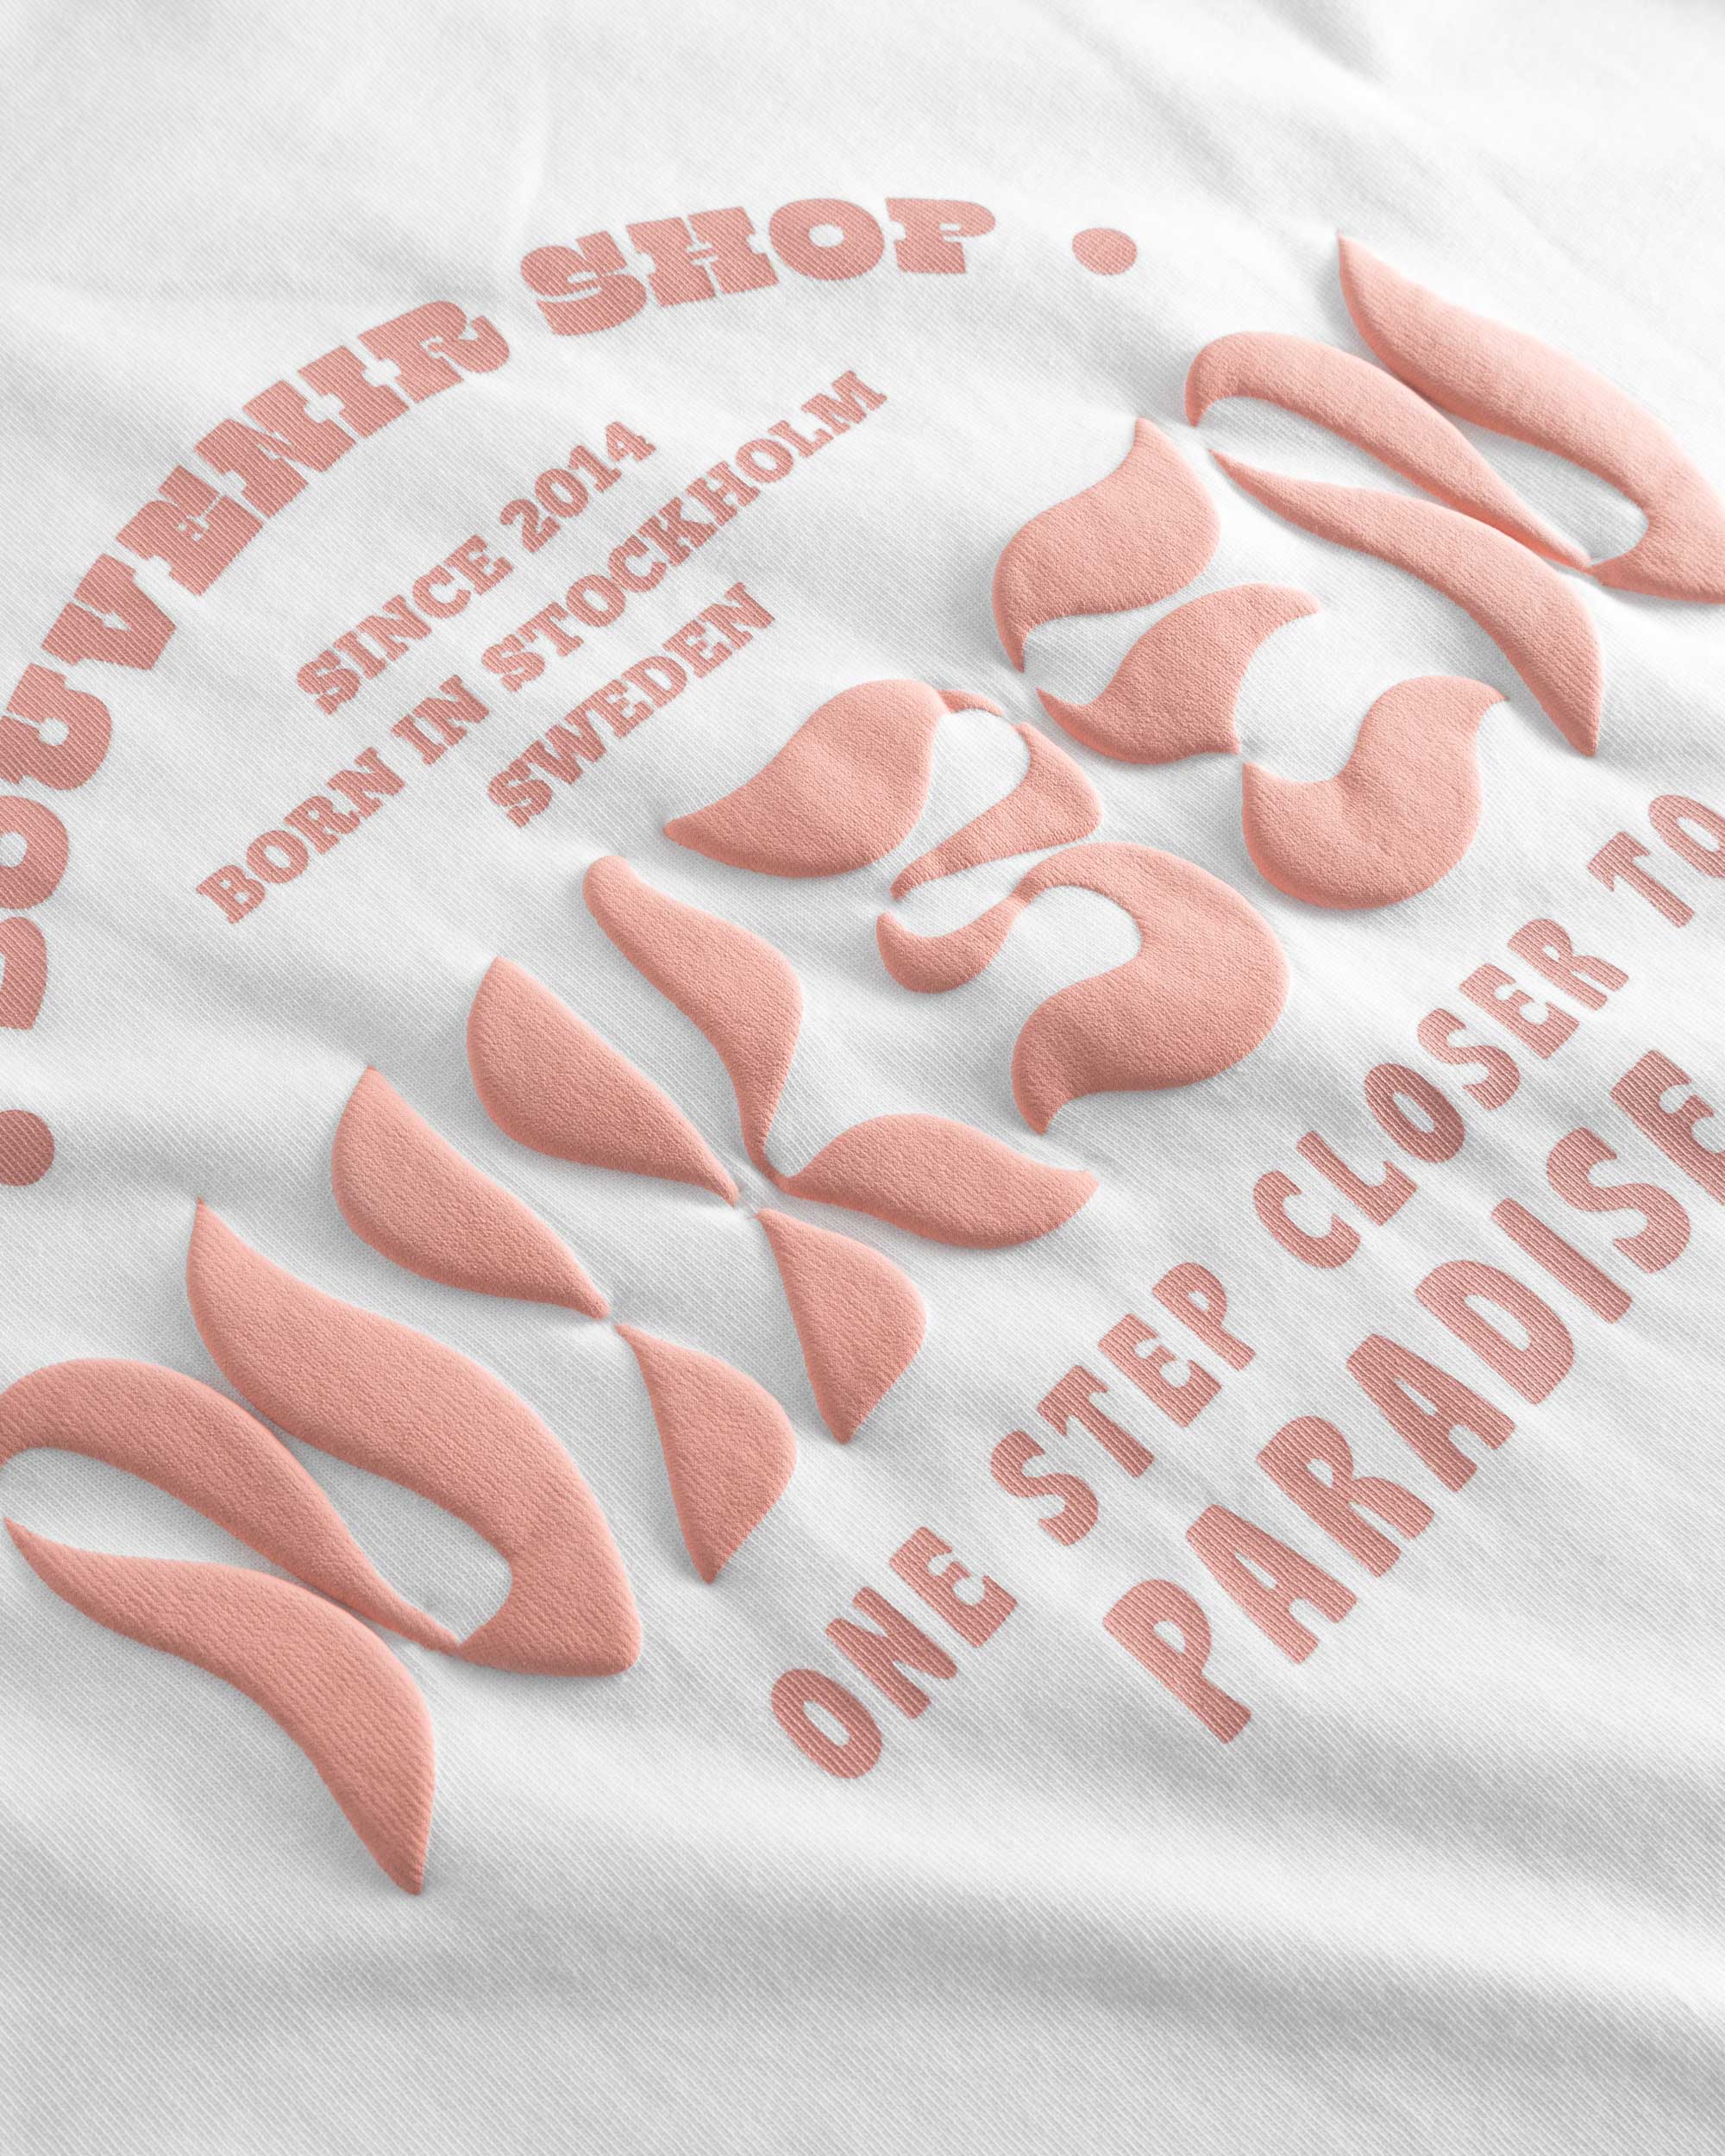 Close up view of orange text print on white t-shirt.